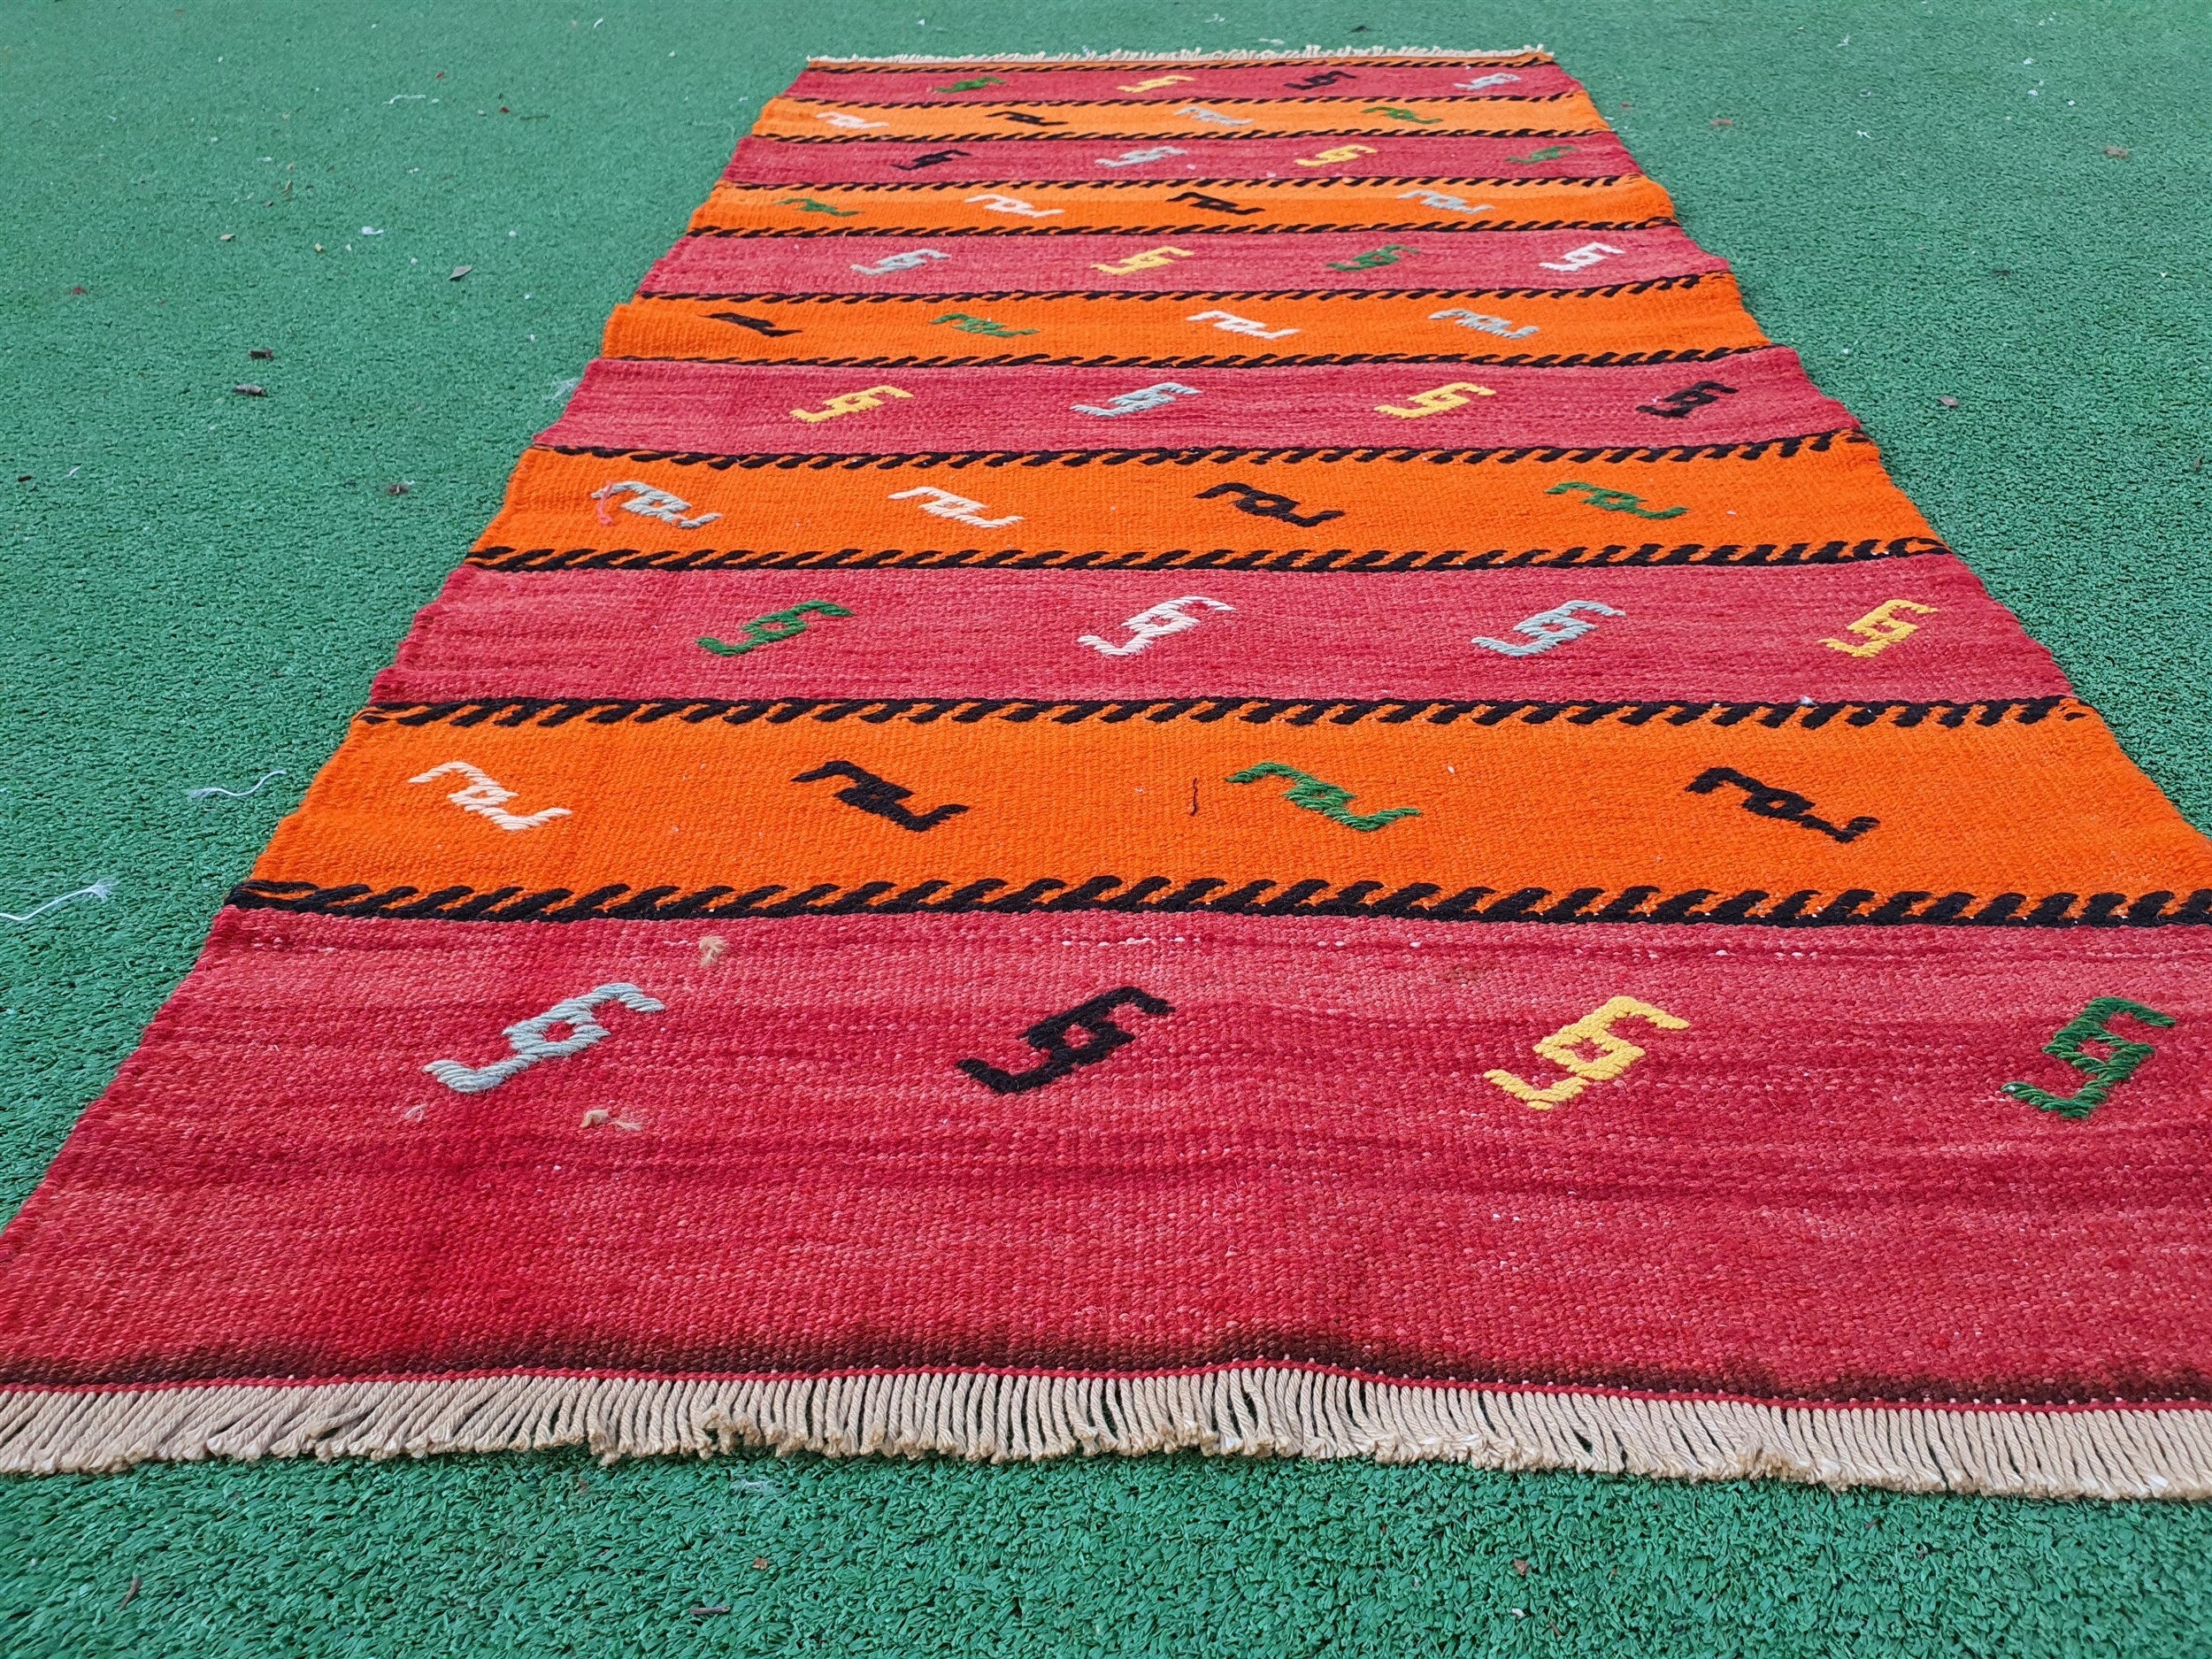 Turkish Kilim Rug, 4 ft 3 in x 2 ft Small Orange and Brown Striped Cicim Embroidered Kilim